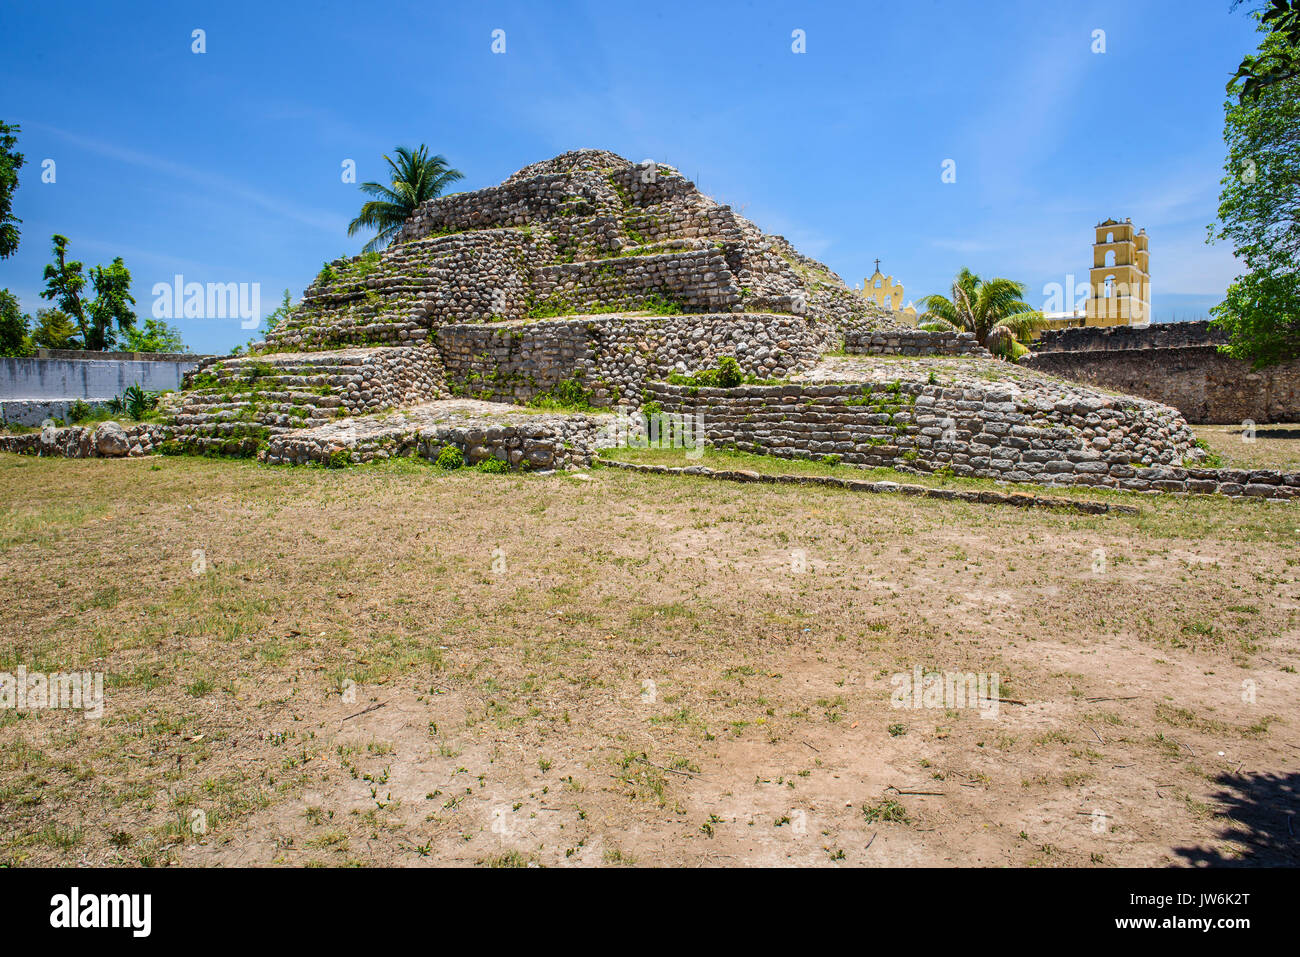 North side of the pyramid in Acanceh archeological site, Acanceh, Yucatan state, Mexico Stock Photo